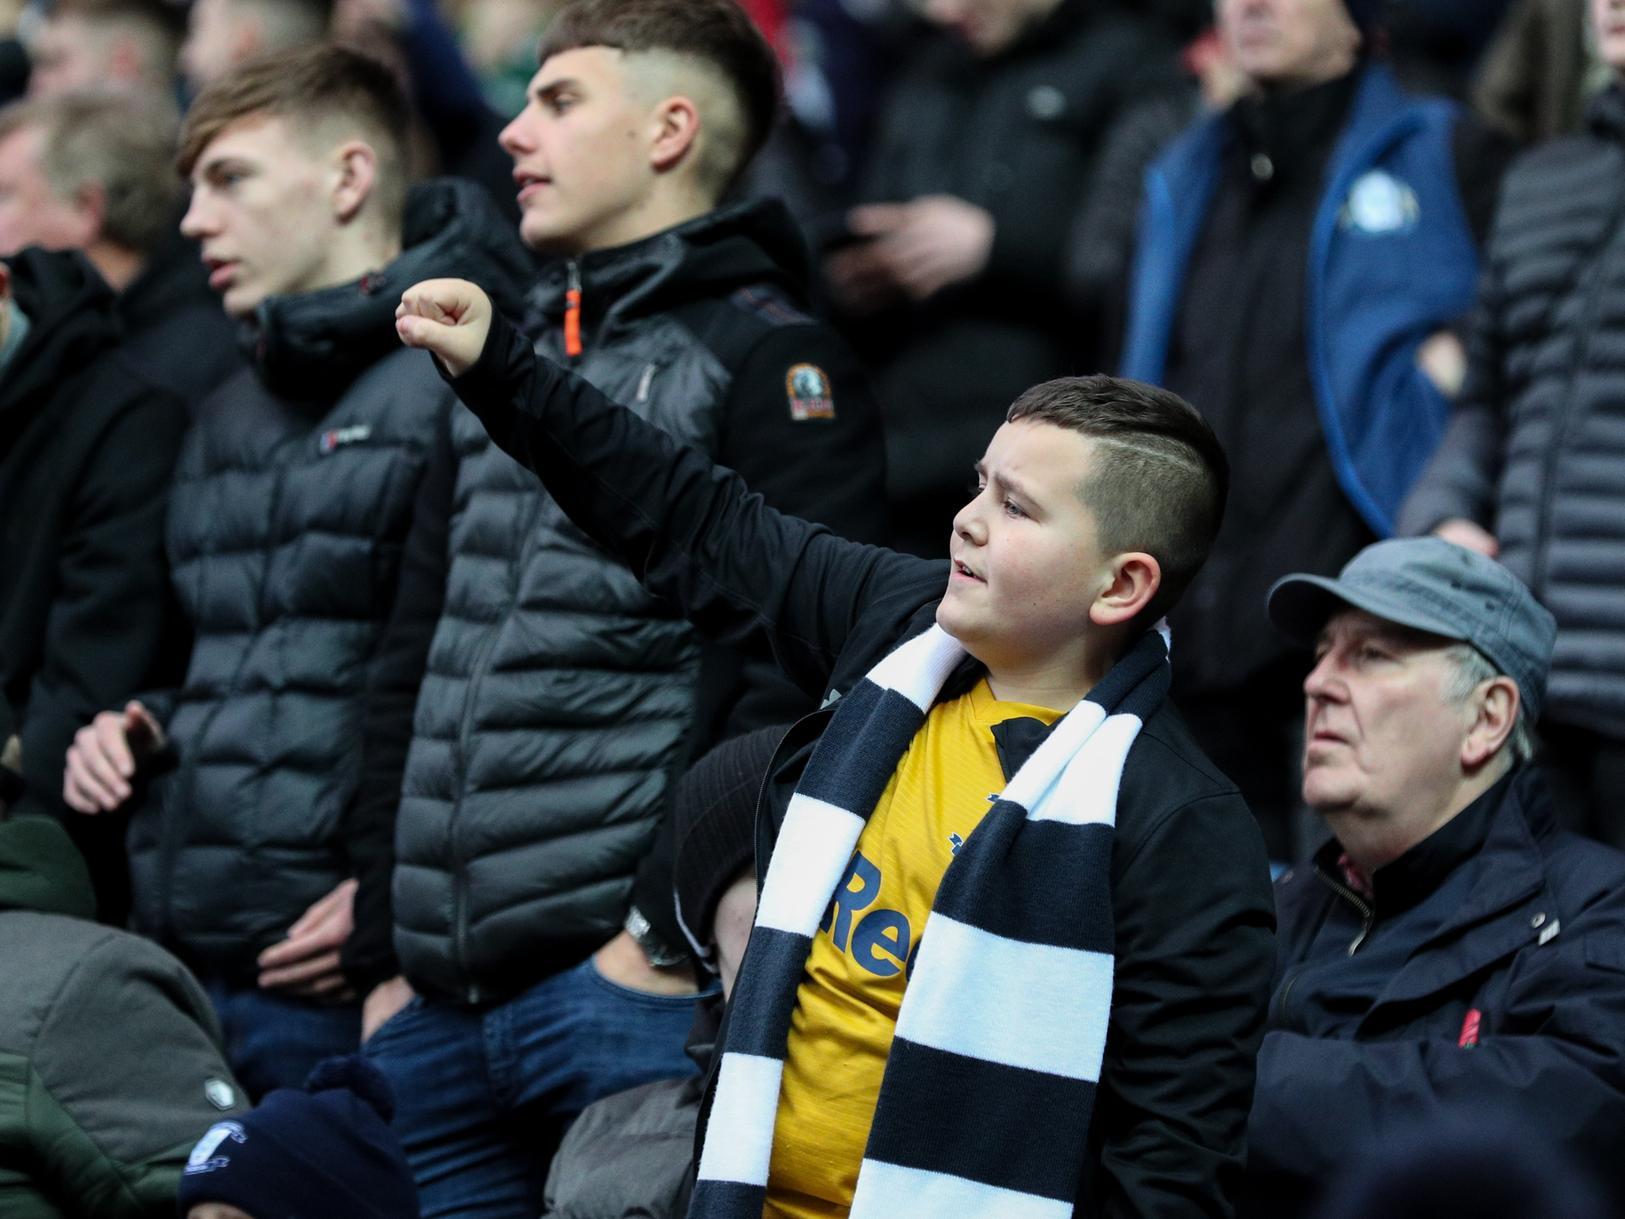 This young PNE fan sports his scarf and PNE shirt with pride